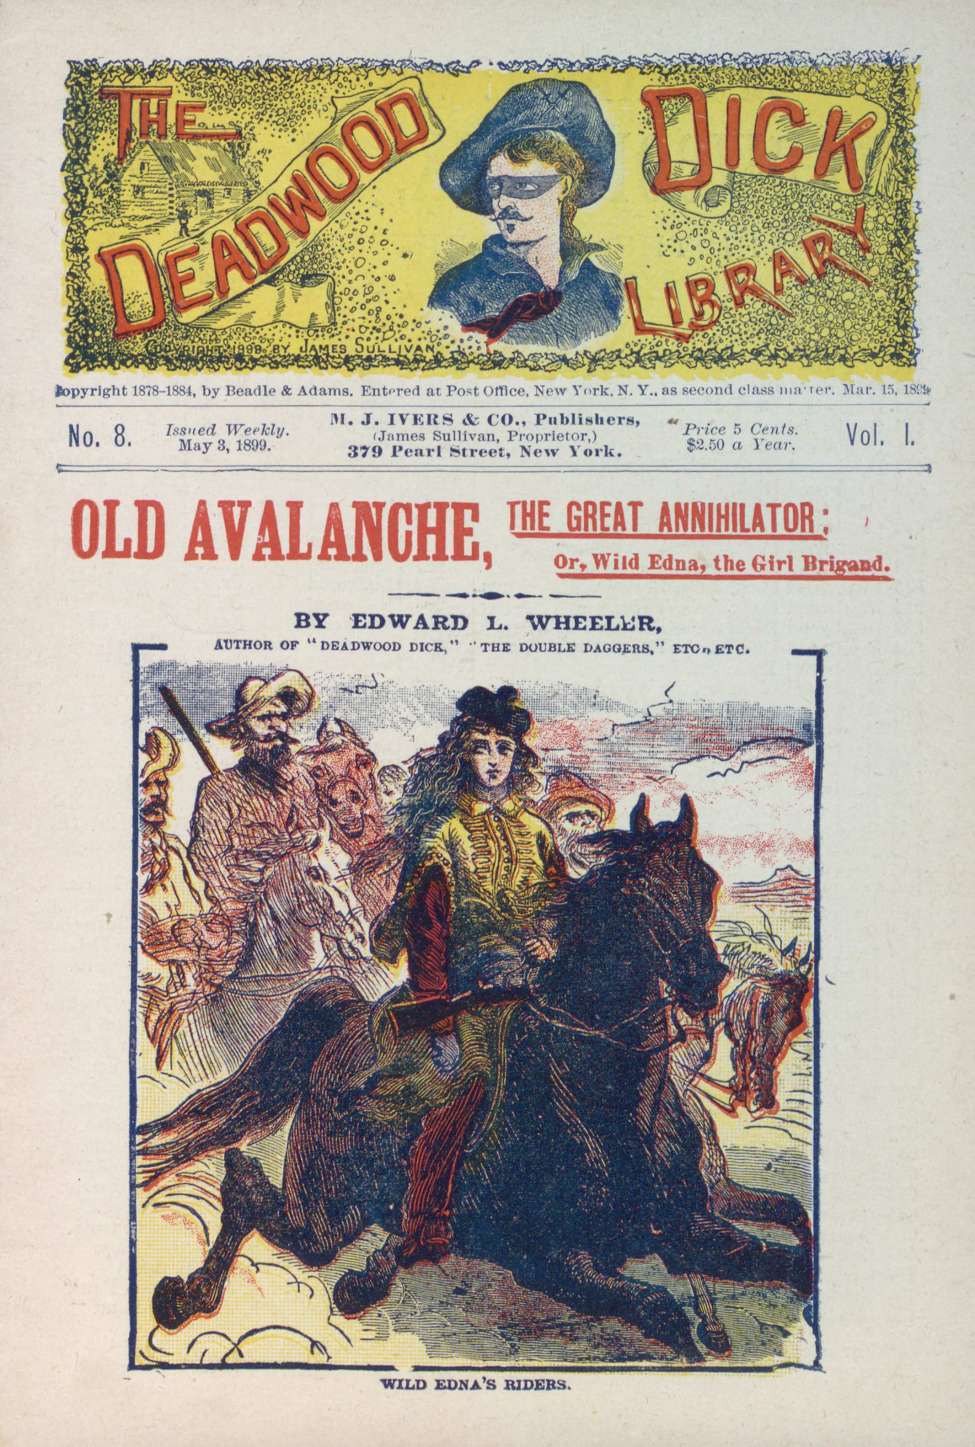 Book Cover For Deadwood Dick Library v1 8 - Old Avalanche, The Great Annihilator